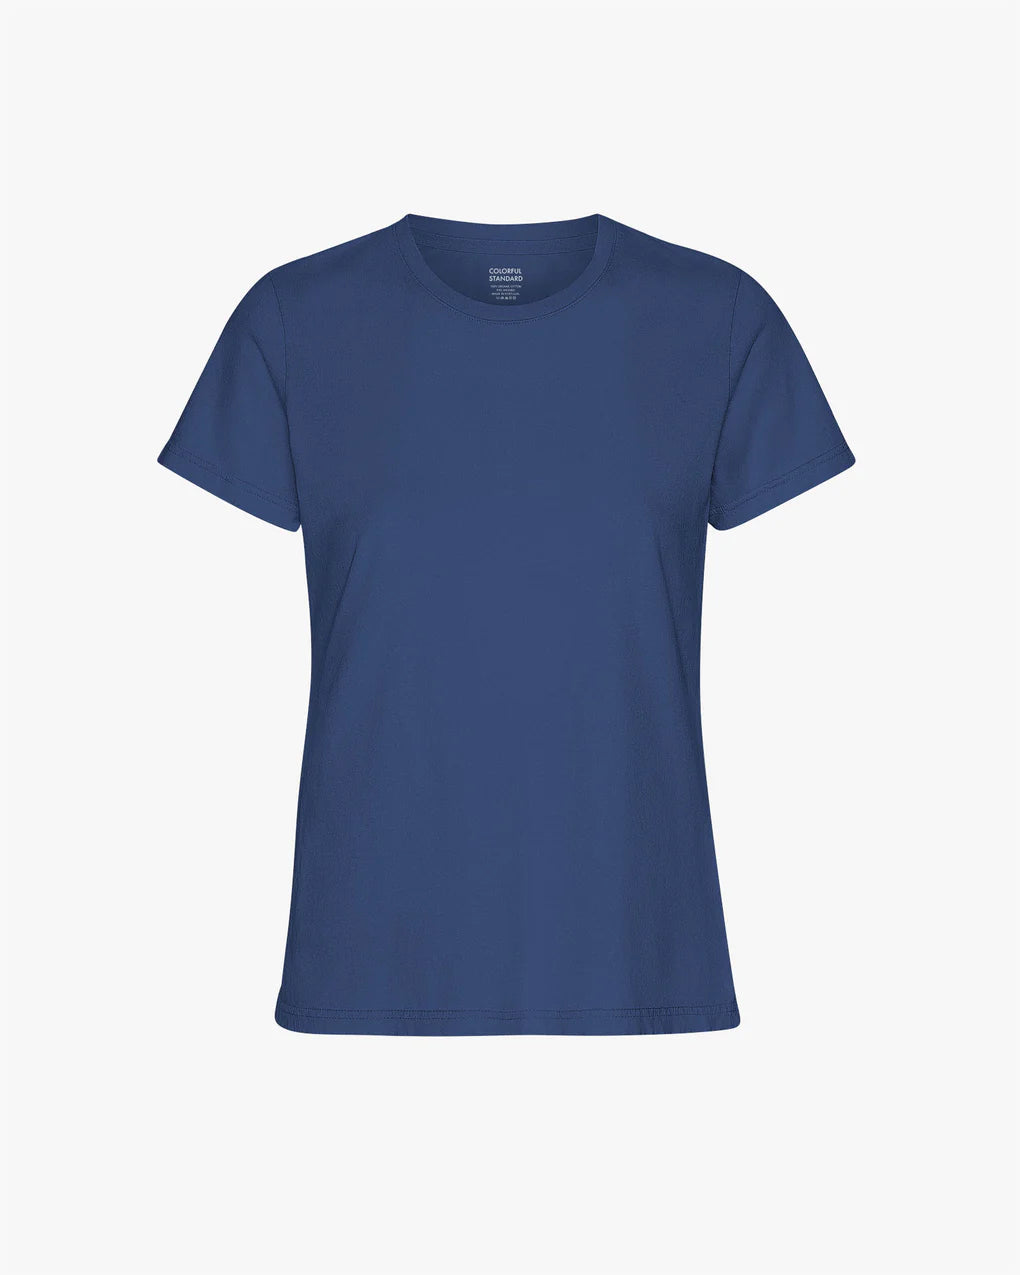 Light Organic Tee - Marine Blue from Colorful Standard made from organic cotton on a white background.